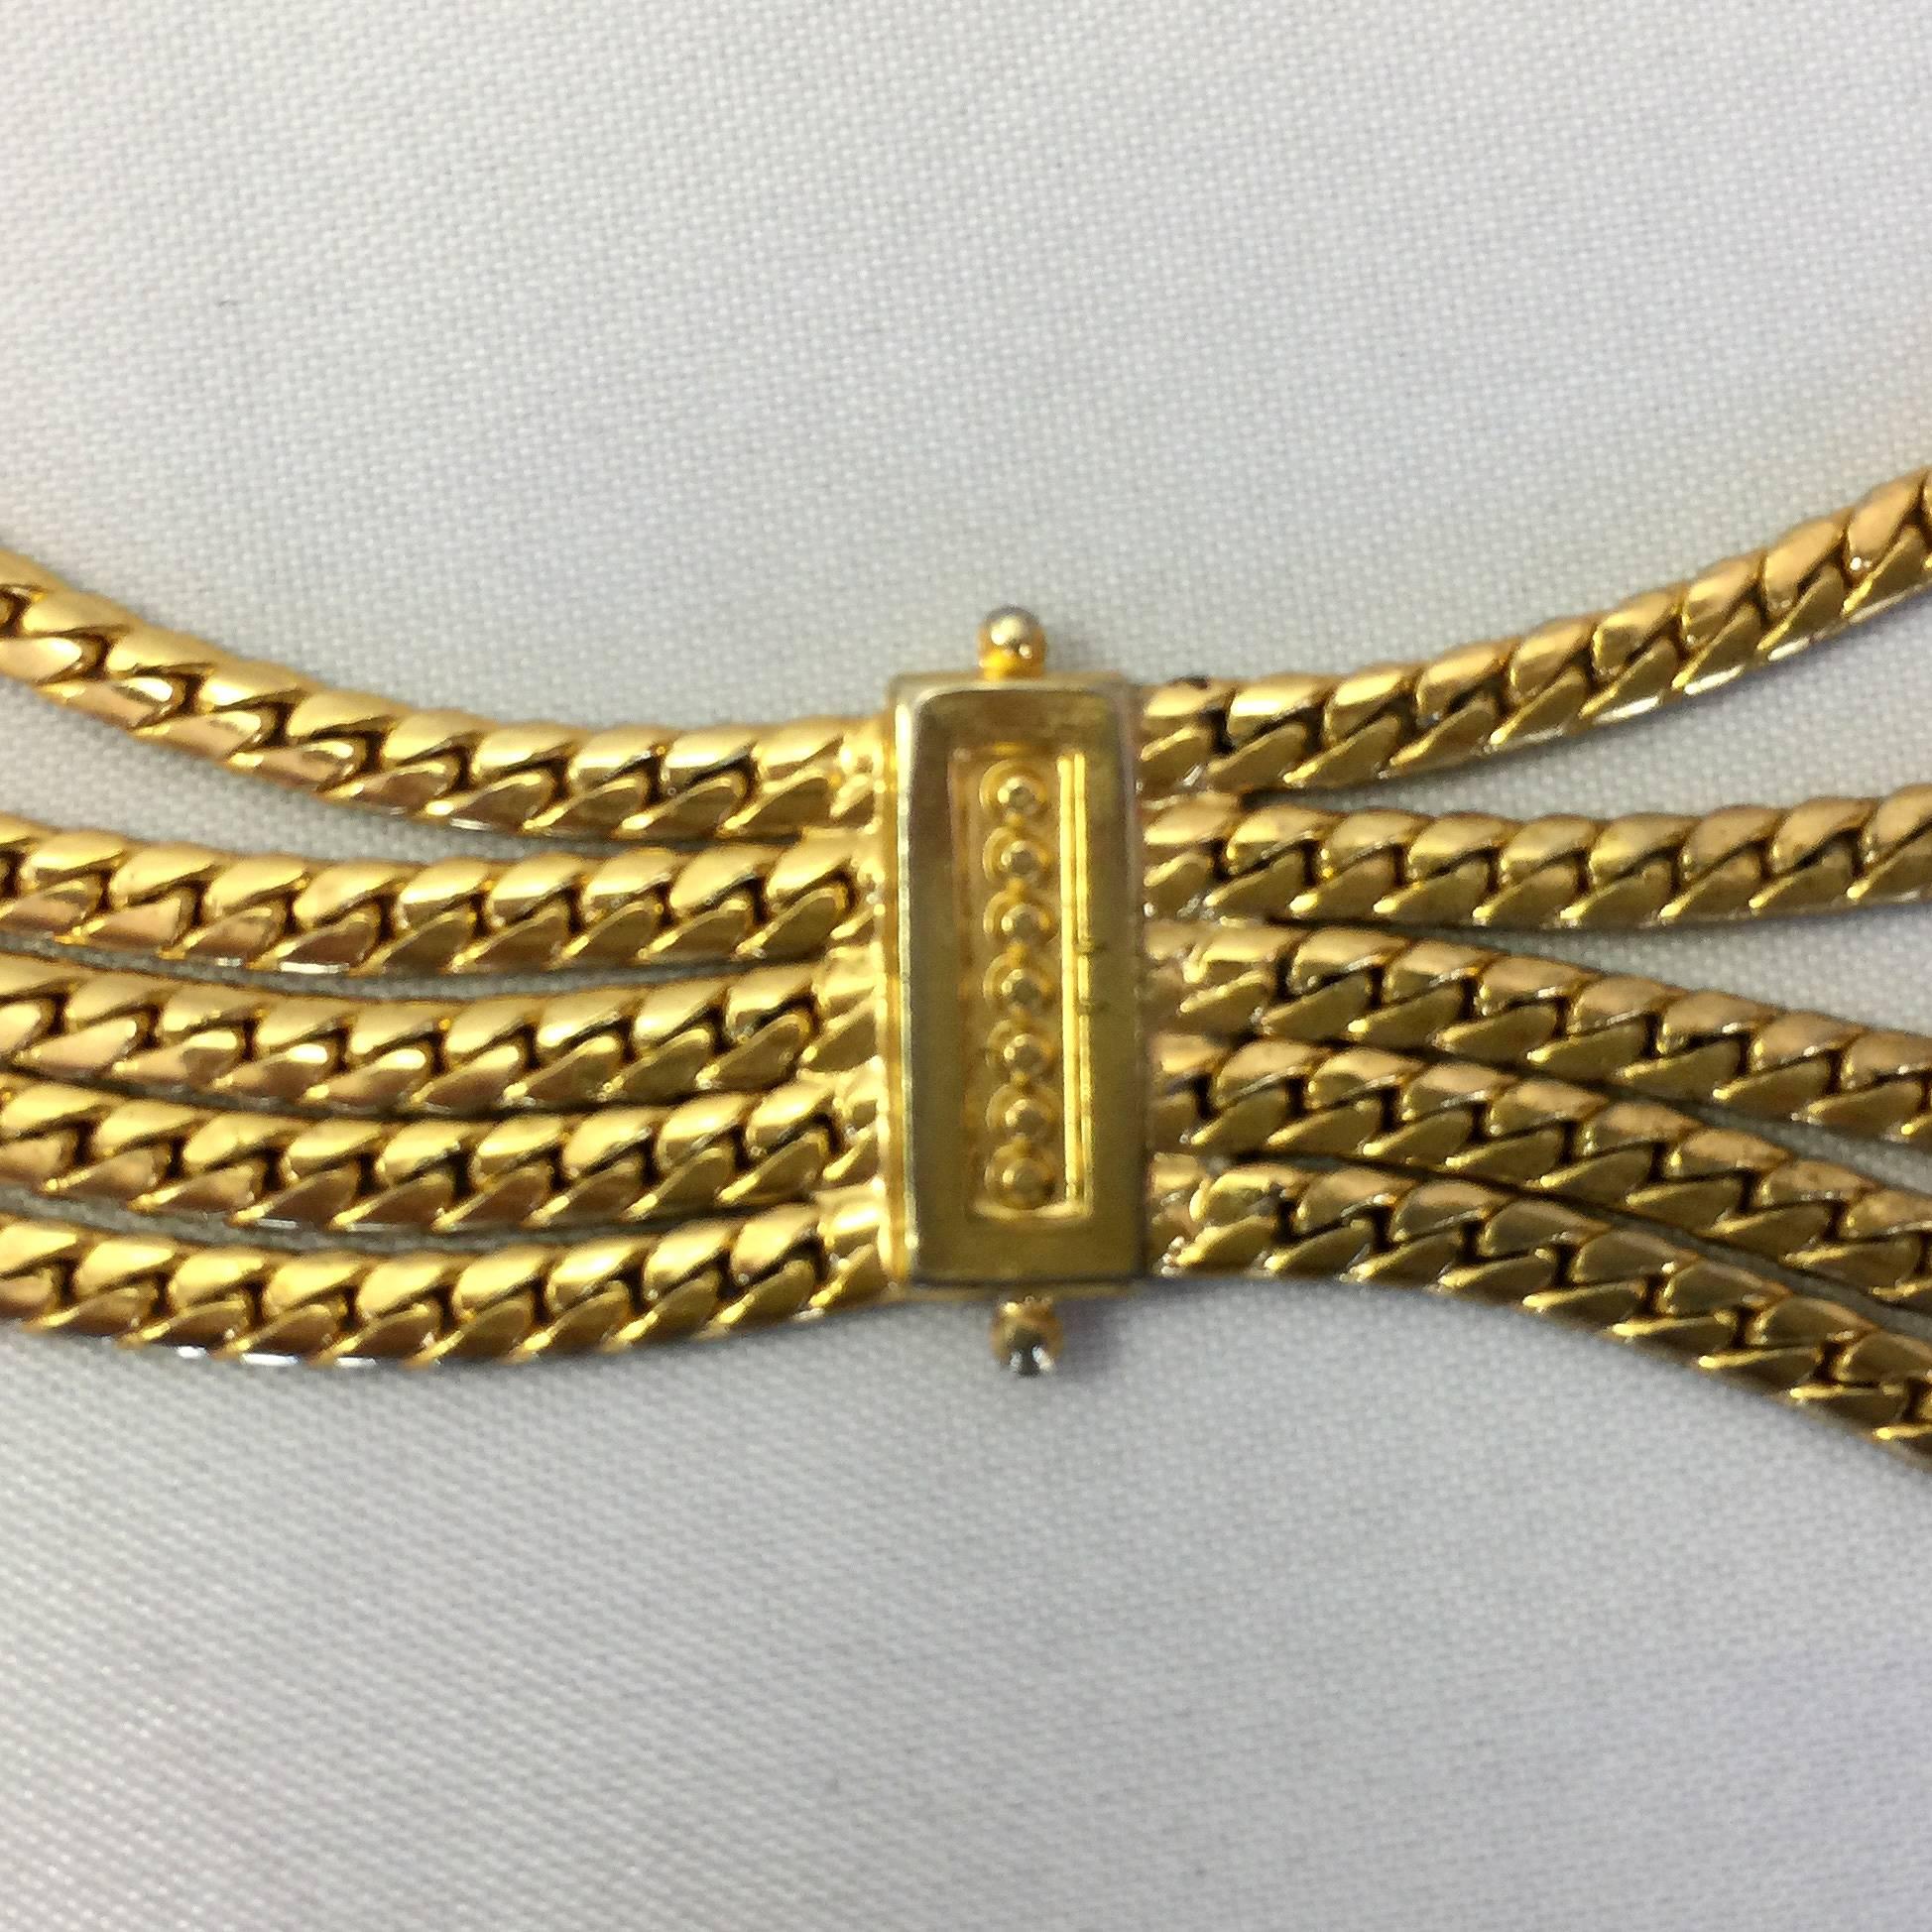 Christian Dior multi-strain gold tone rope chain belt with geometric accents. 

Signed: Christian Dior

Measurments:
1